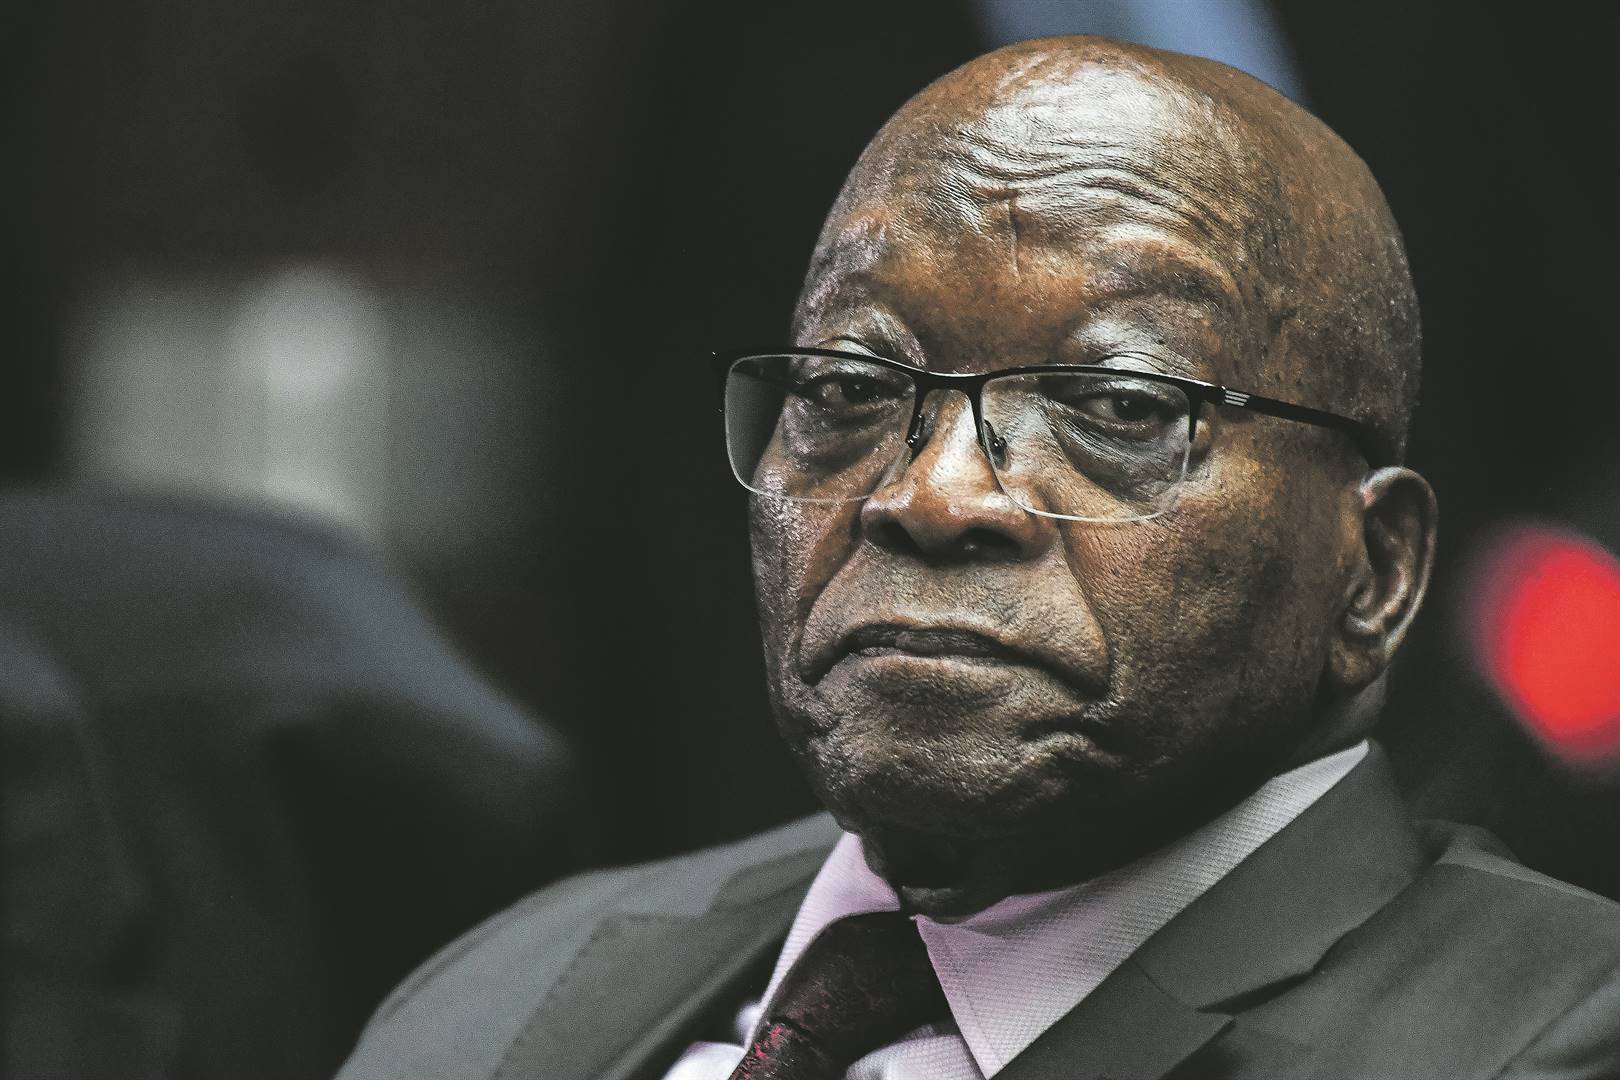 News24 | Another blow for Zuma, as ConCourt refuses his private prosecution enforcement appeal